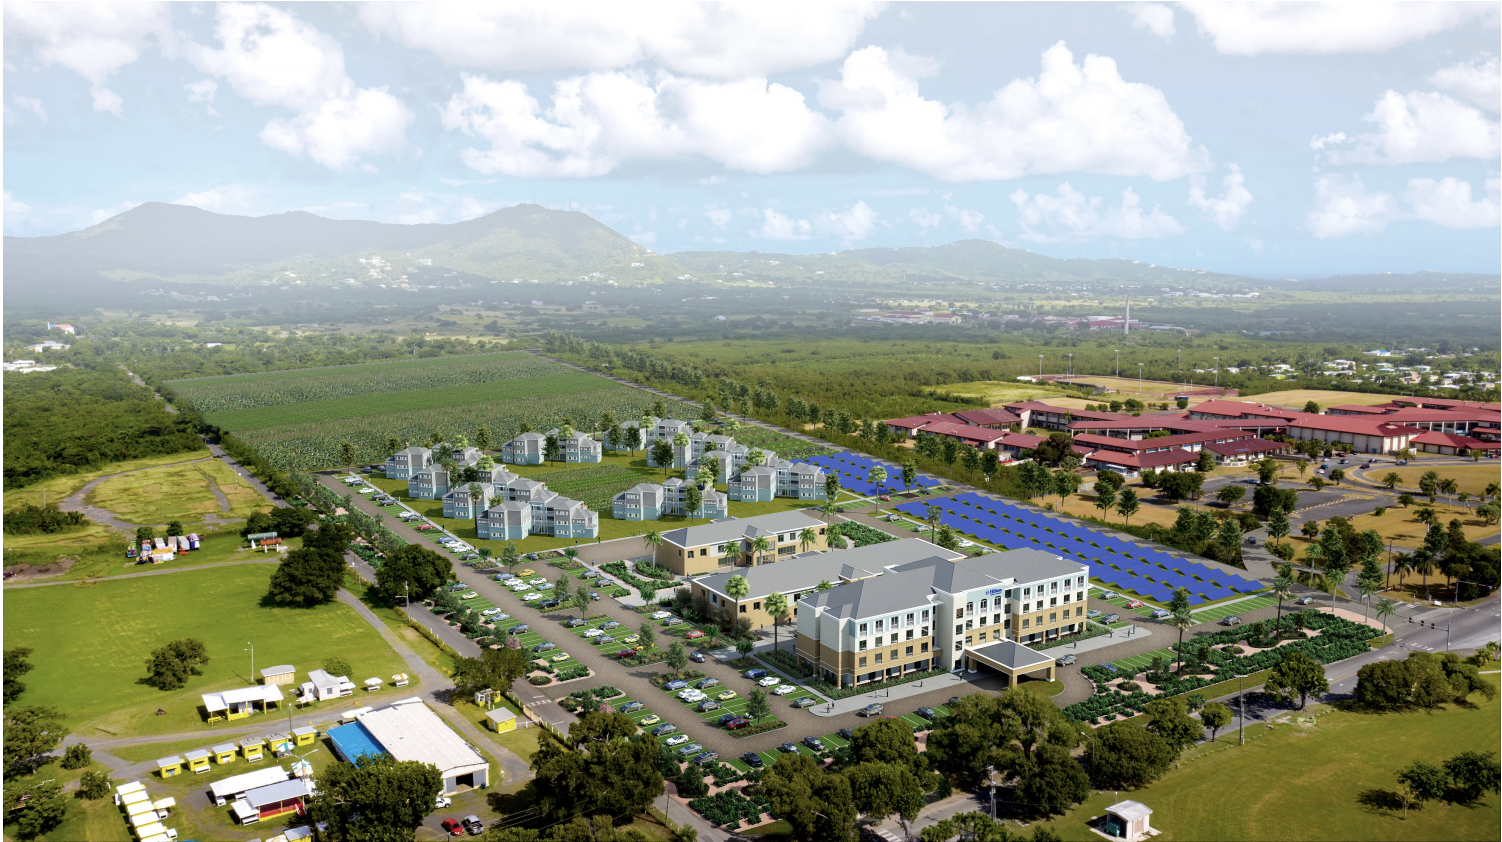 TECH VILLAGE: AN INNOVATIVE, SUSTAINABLE ST. CROIX